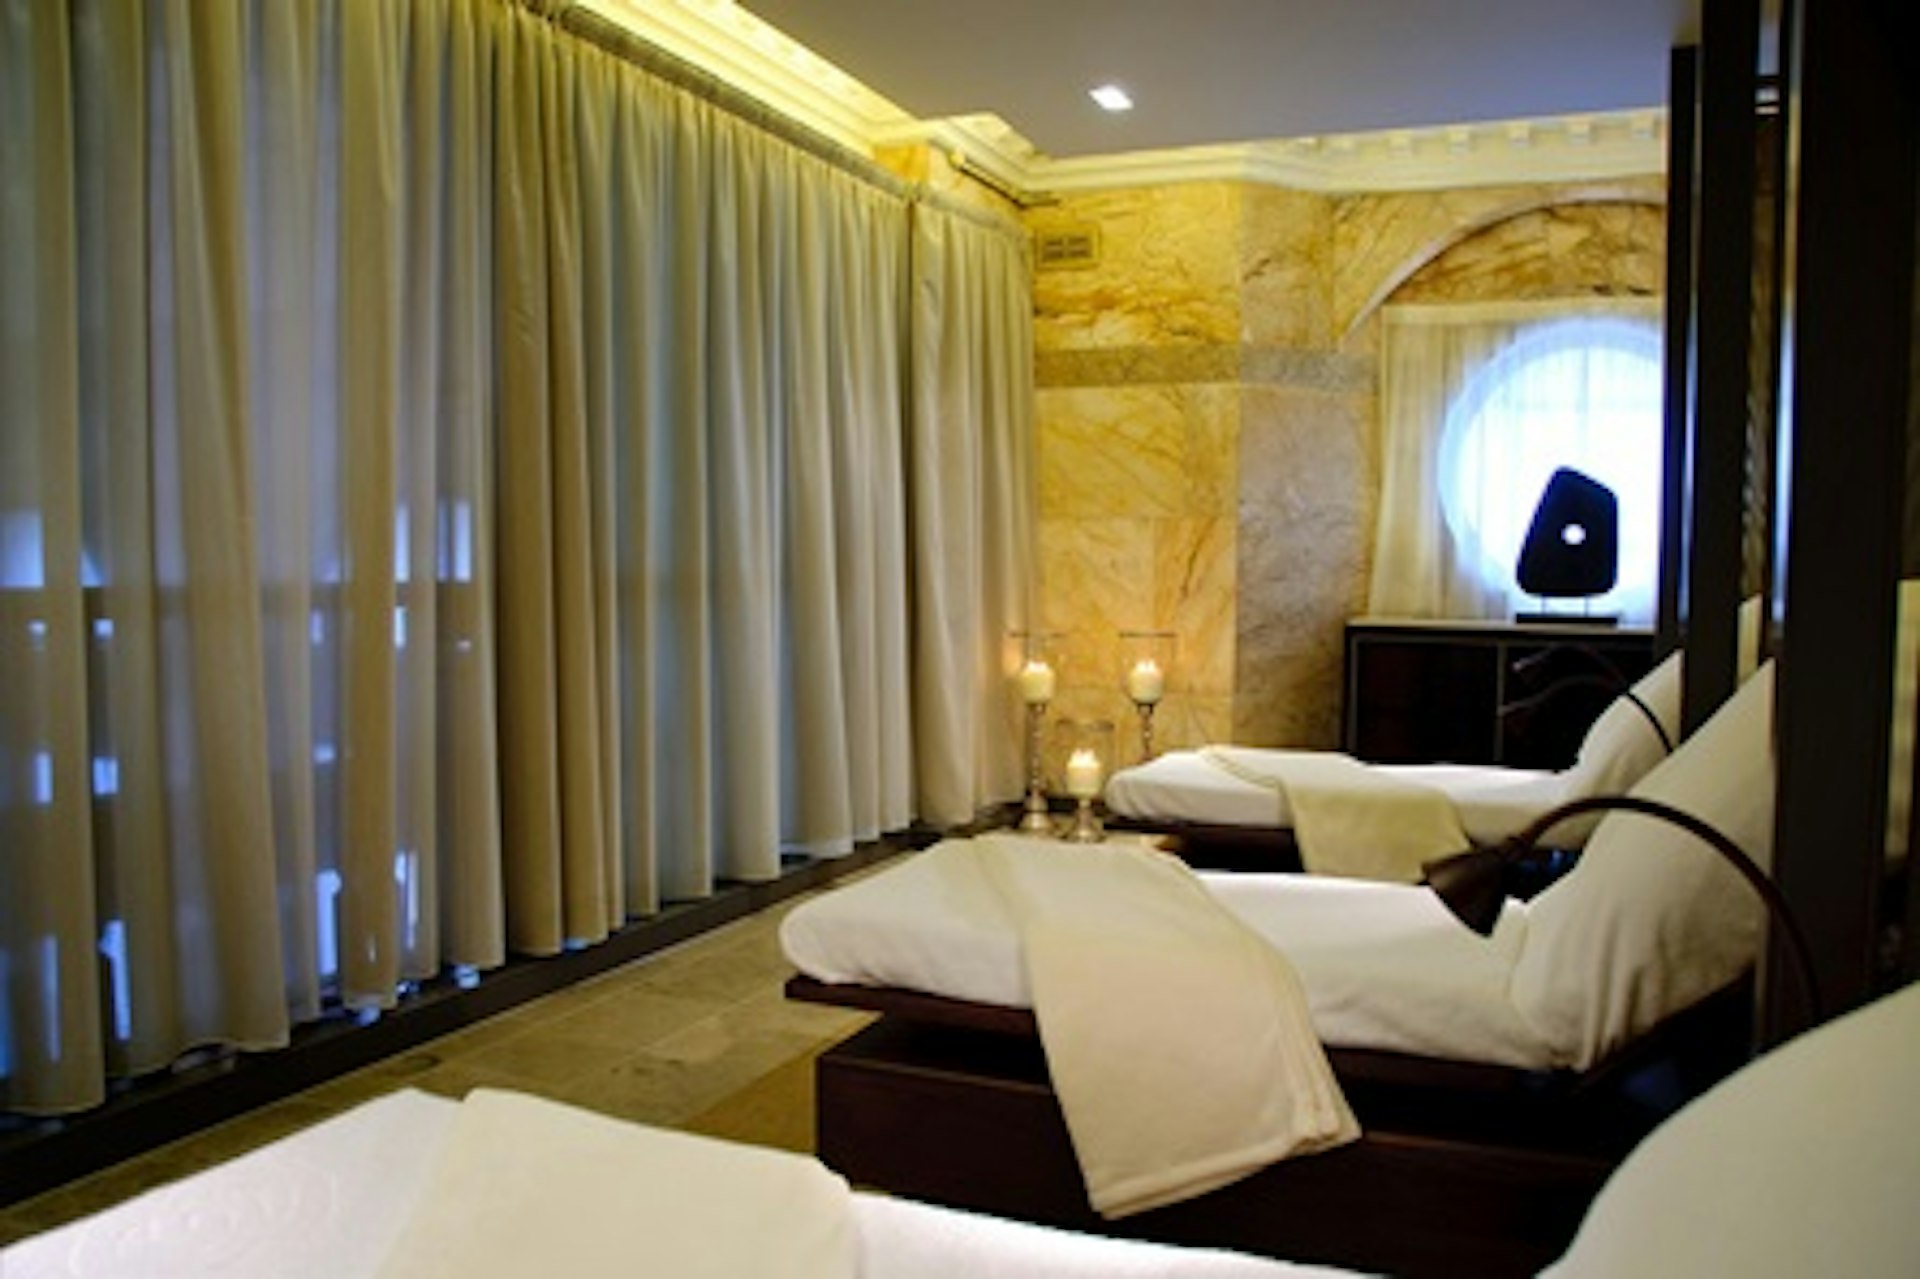 Refreshing Pamper Time with Two Treatments and Dining for Two at Luxury SoSPA at the 5* Sofitel London St James 1